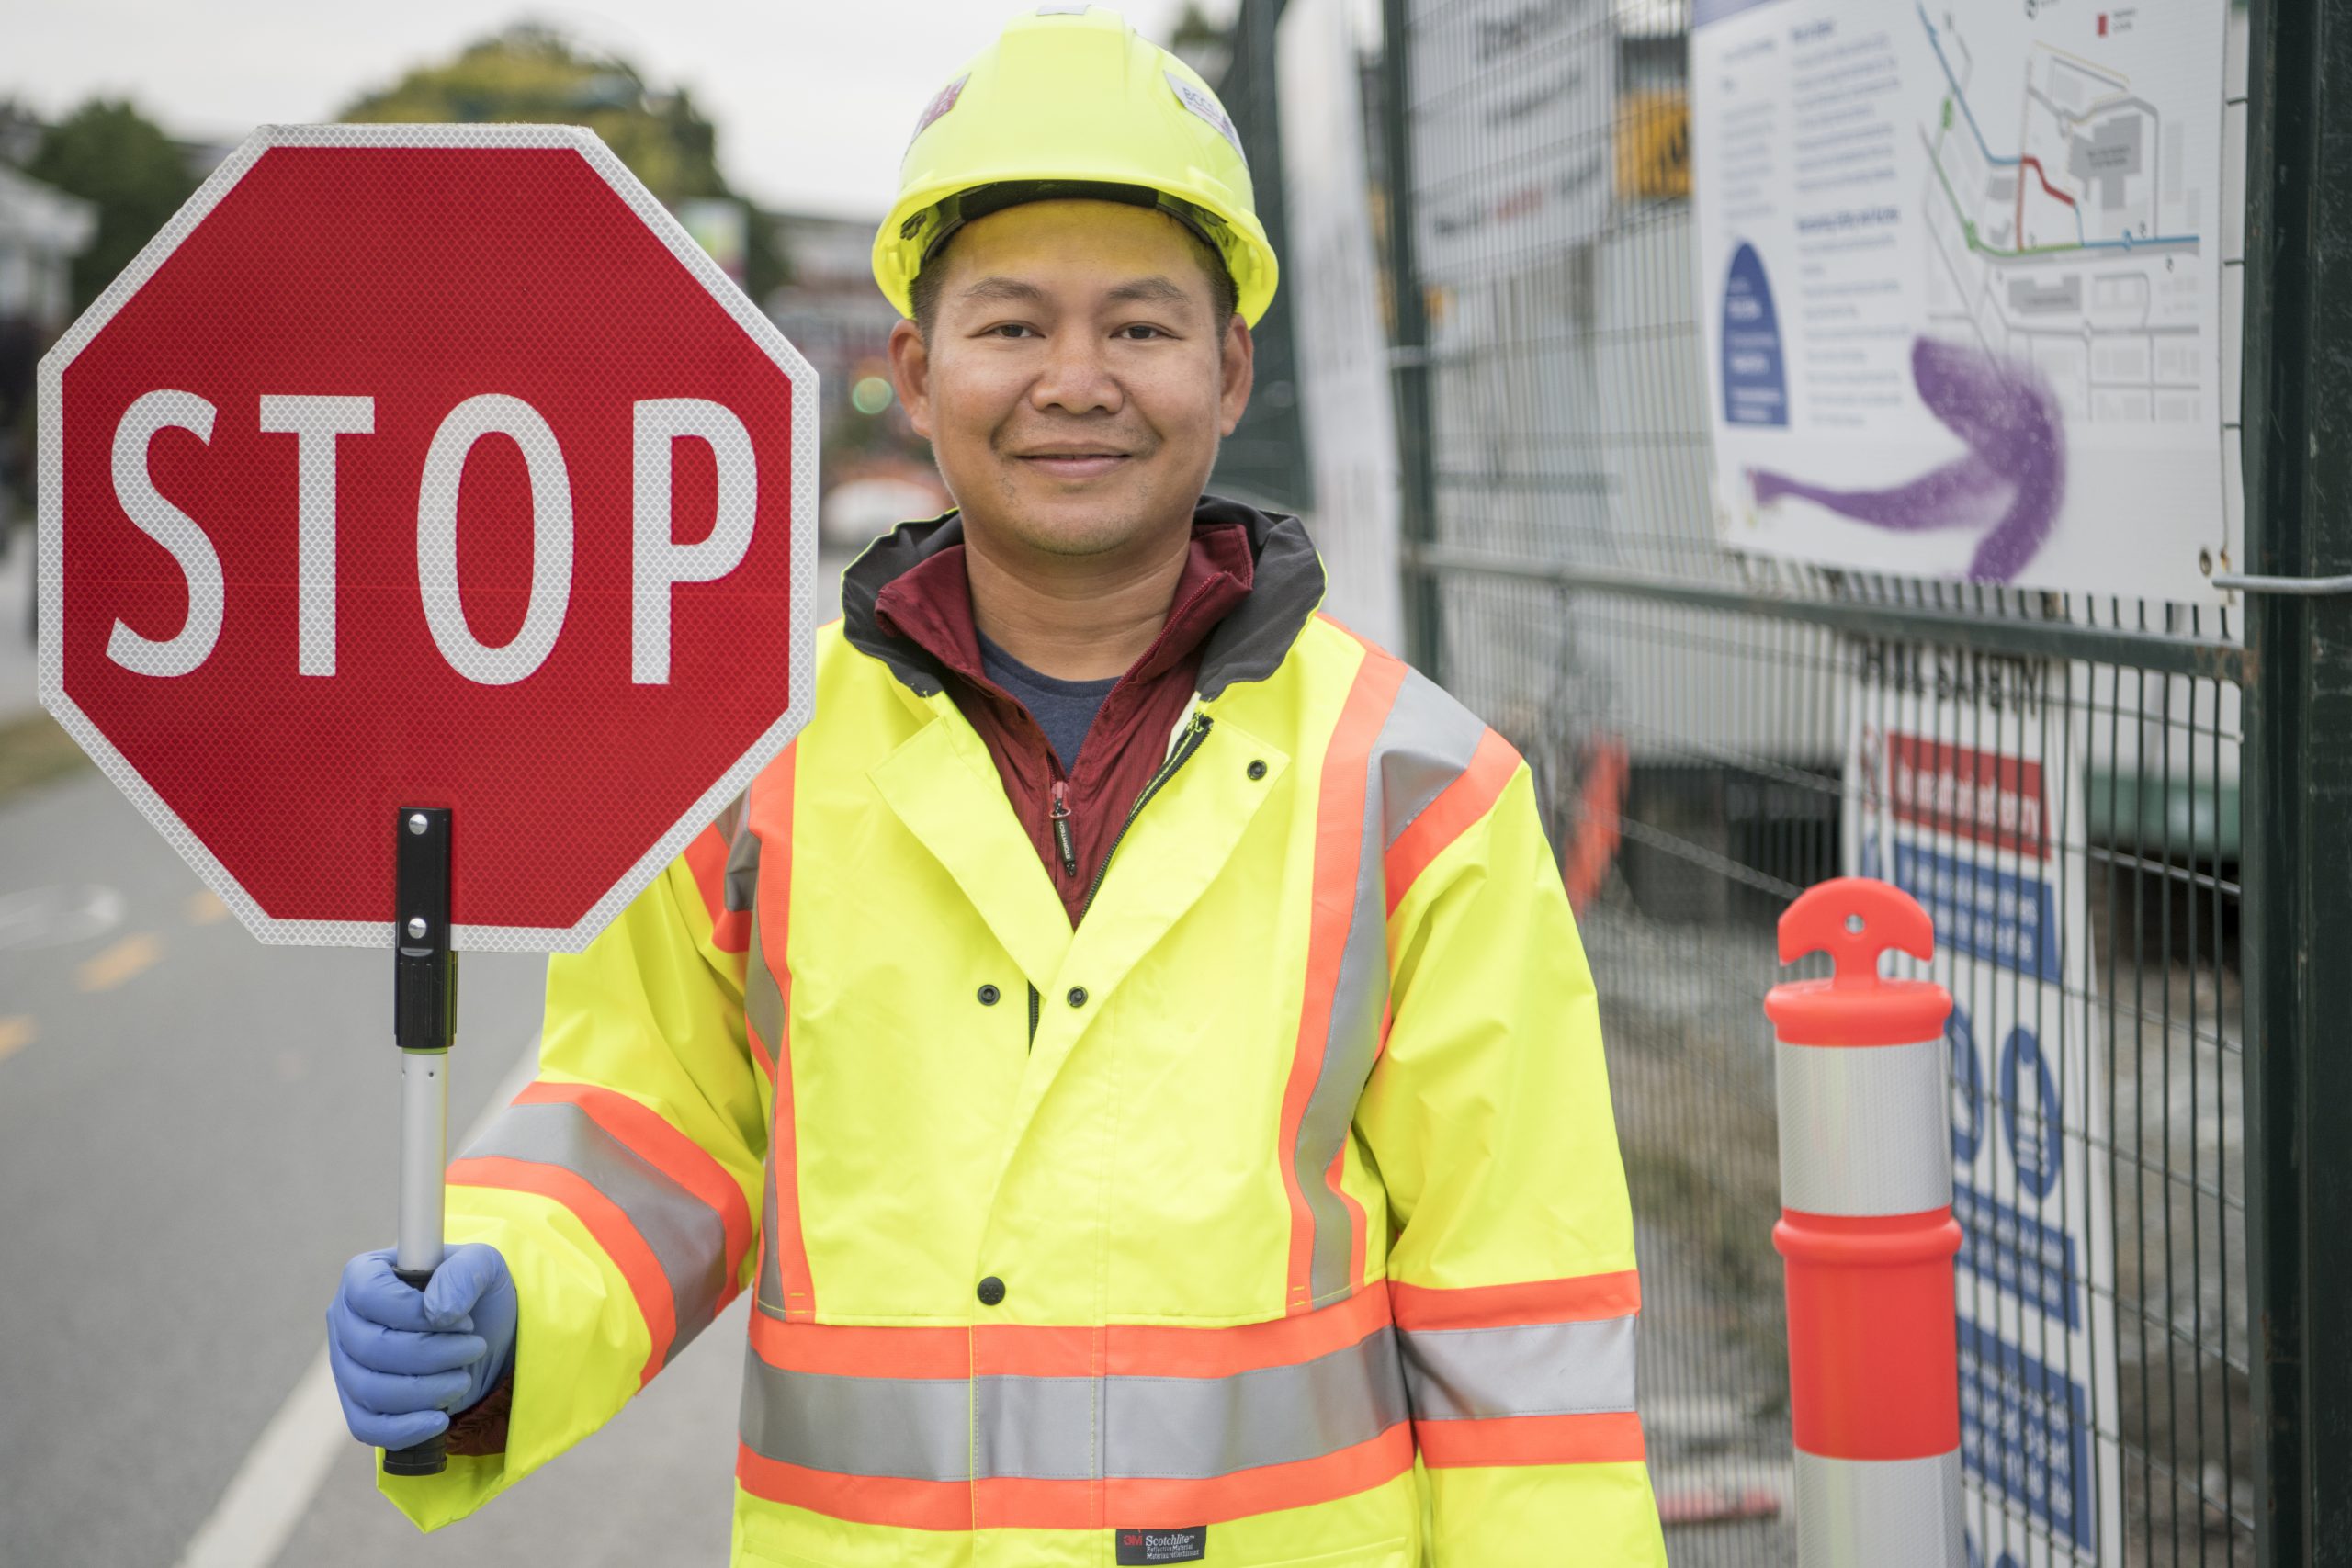 Picture of Phu, traffic control person